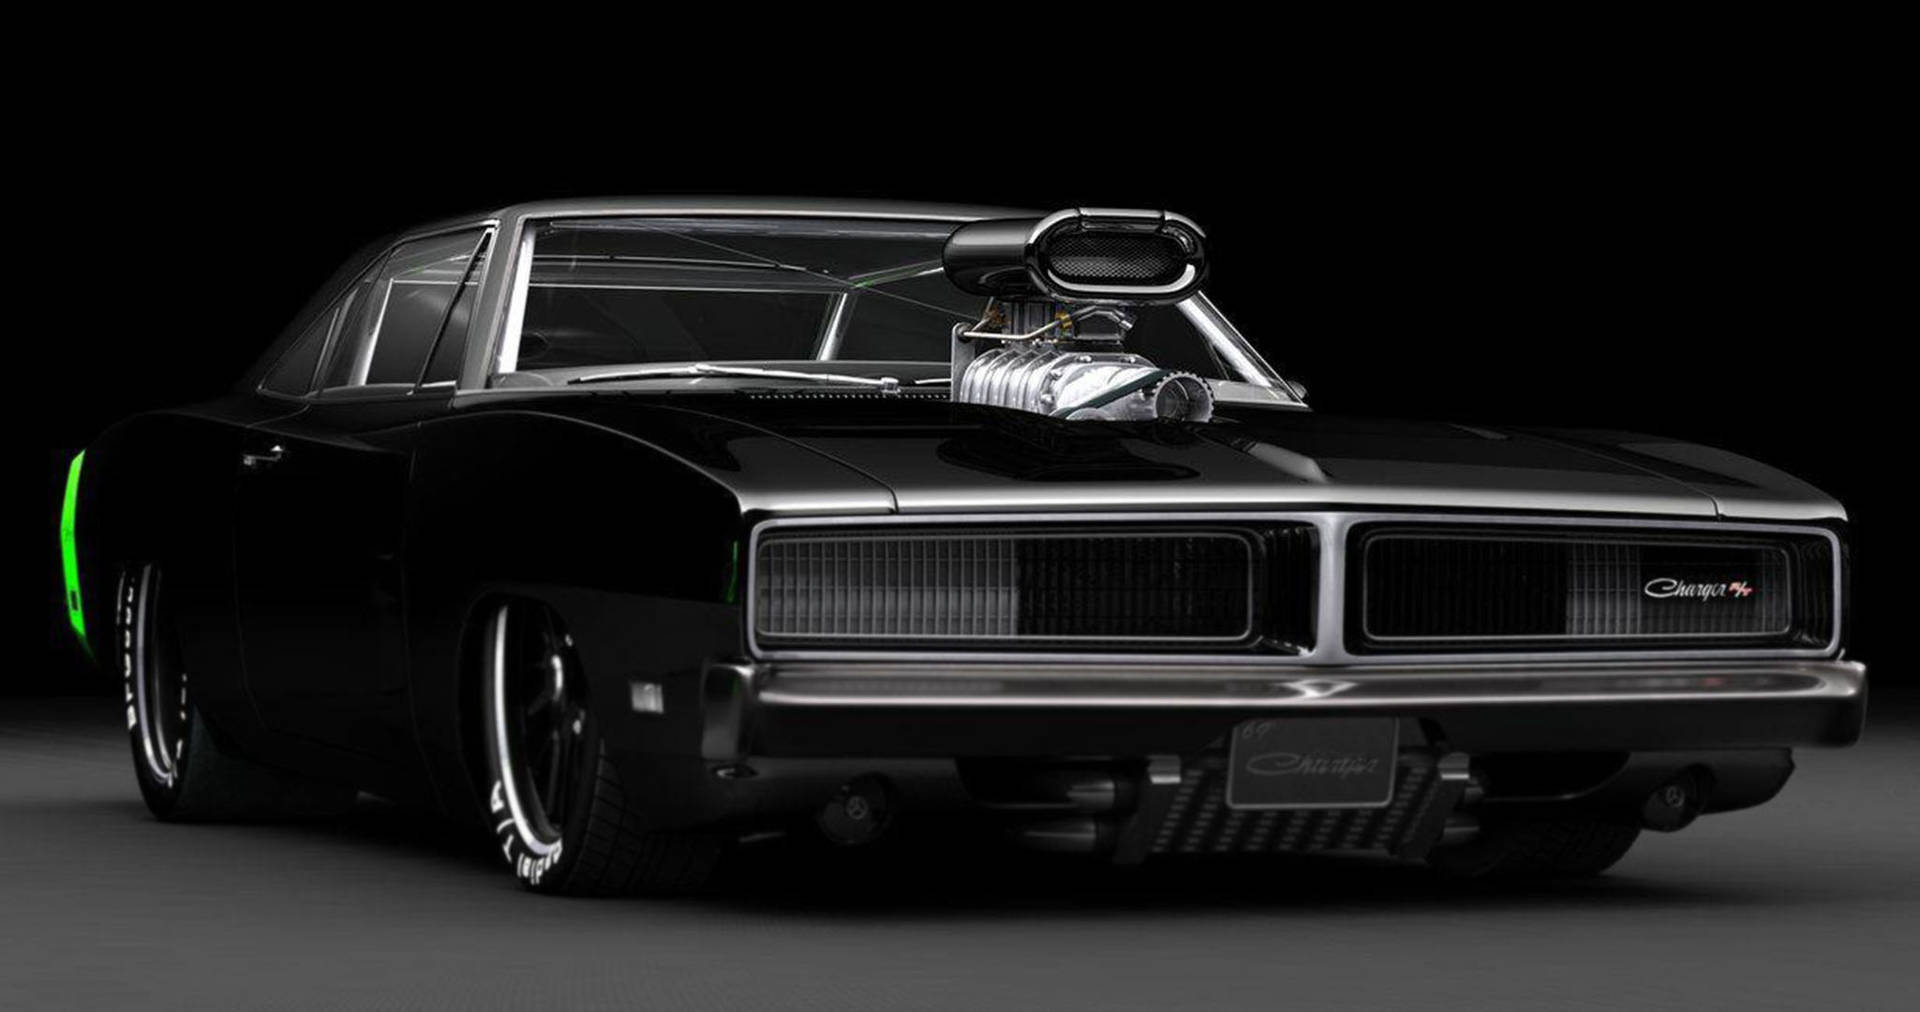 ThexPlorer: Full view of a black 1968 dodge charger car